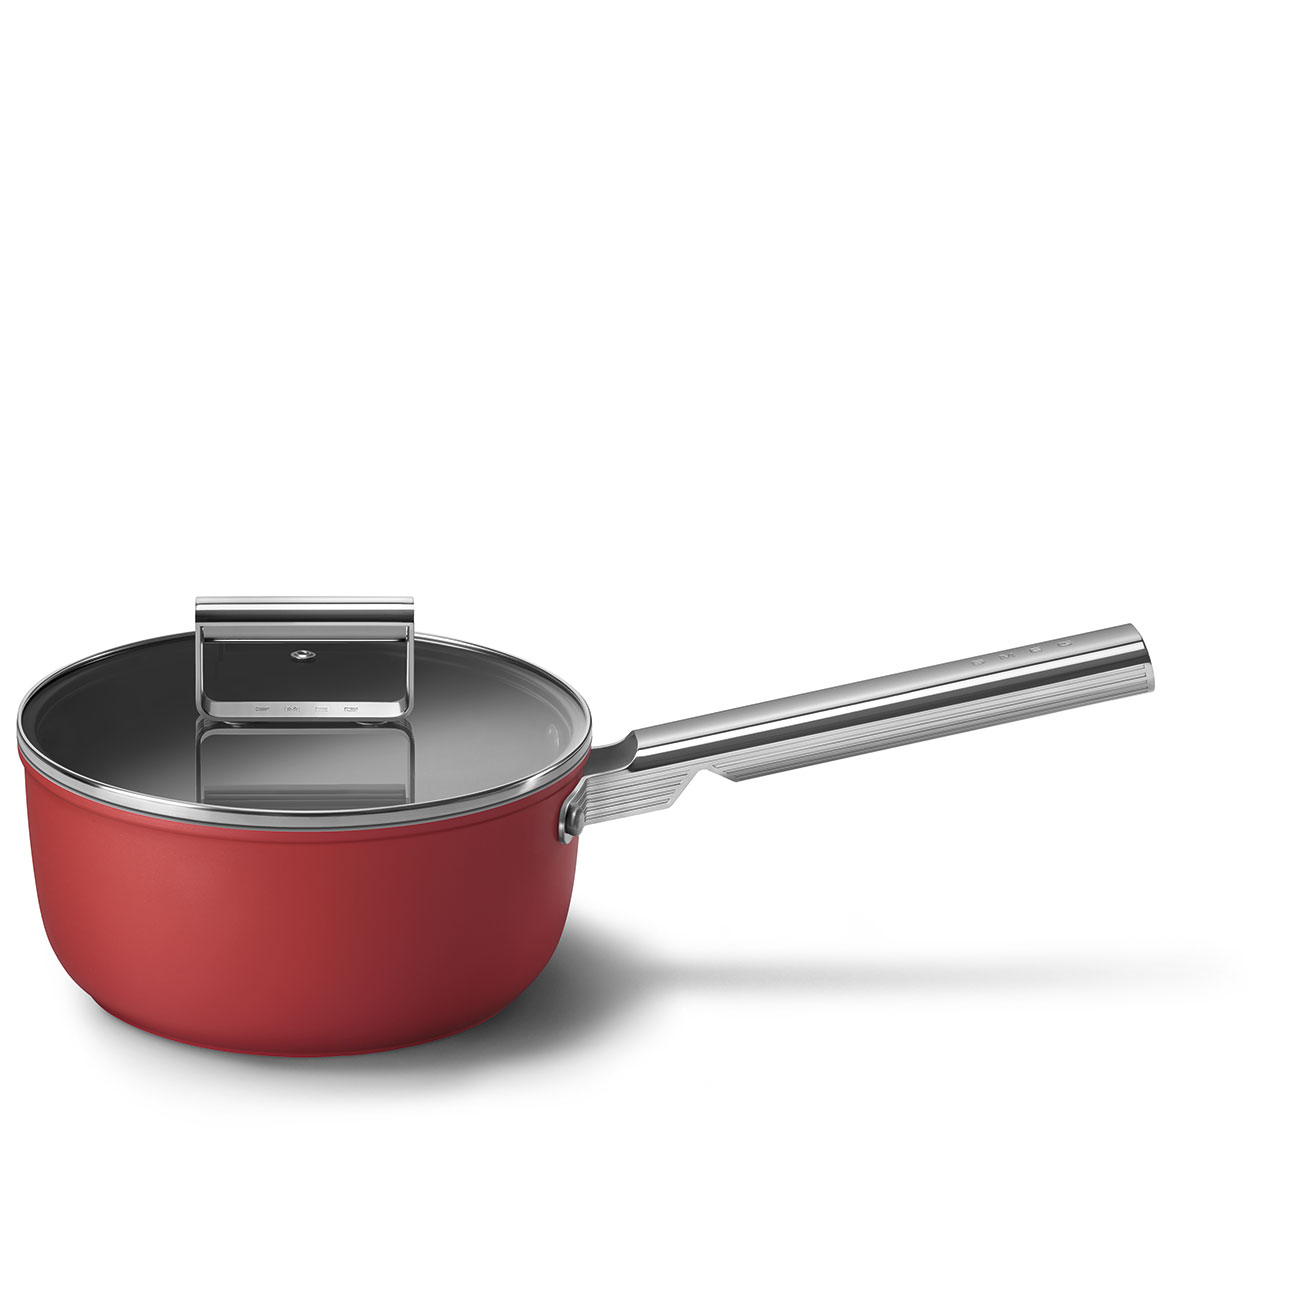 Smeg Red Non-stick Saucepan with glass lid and stainless steel handle_11